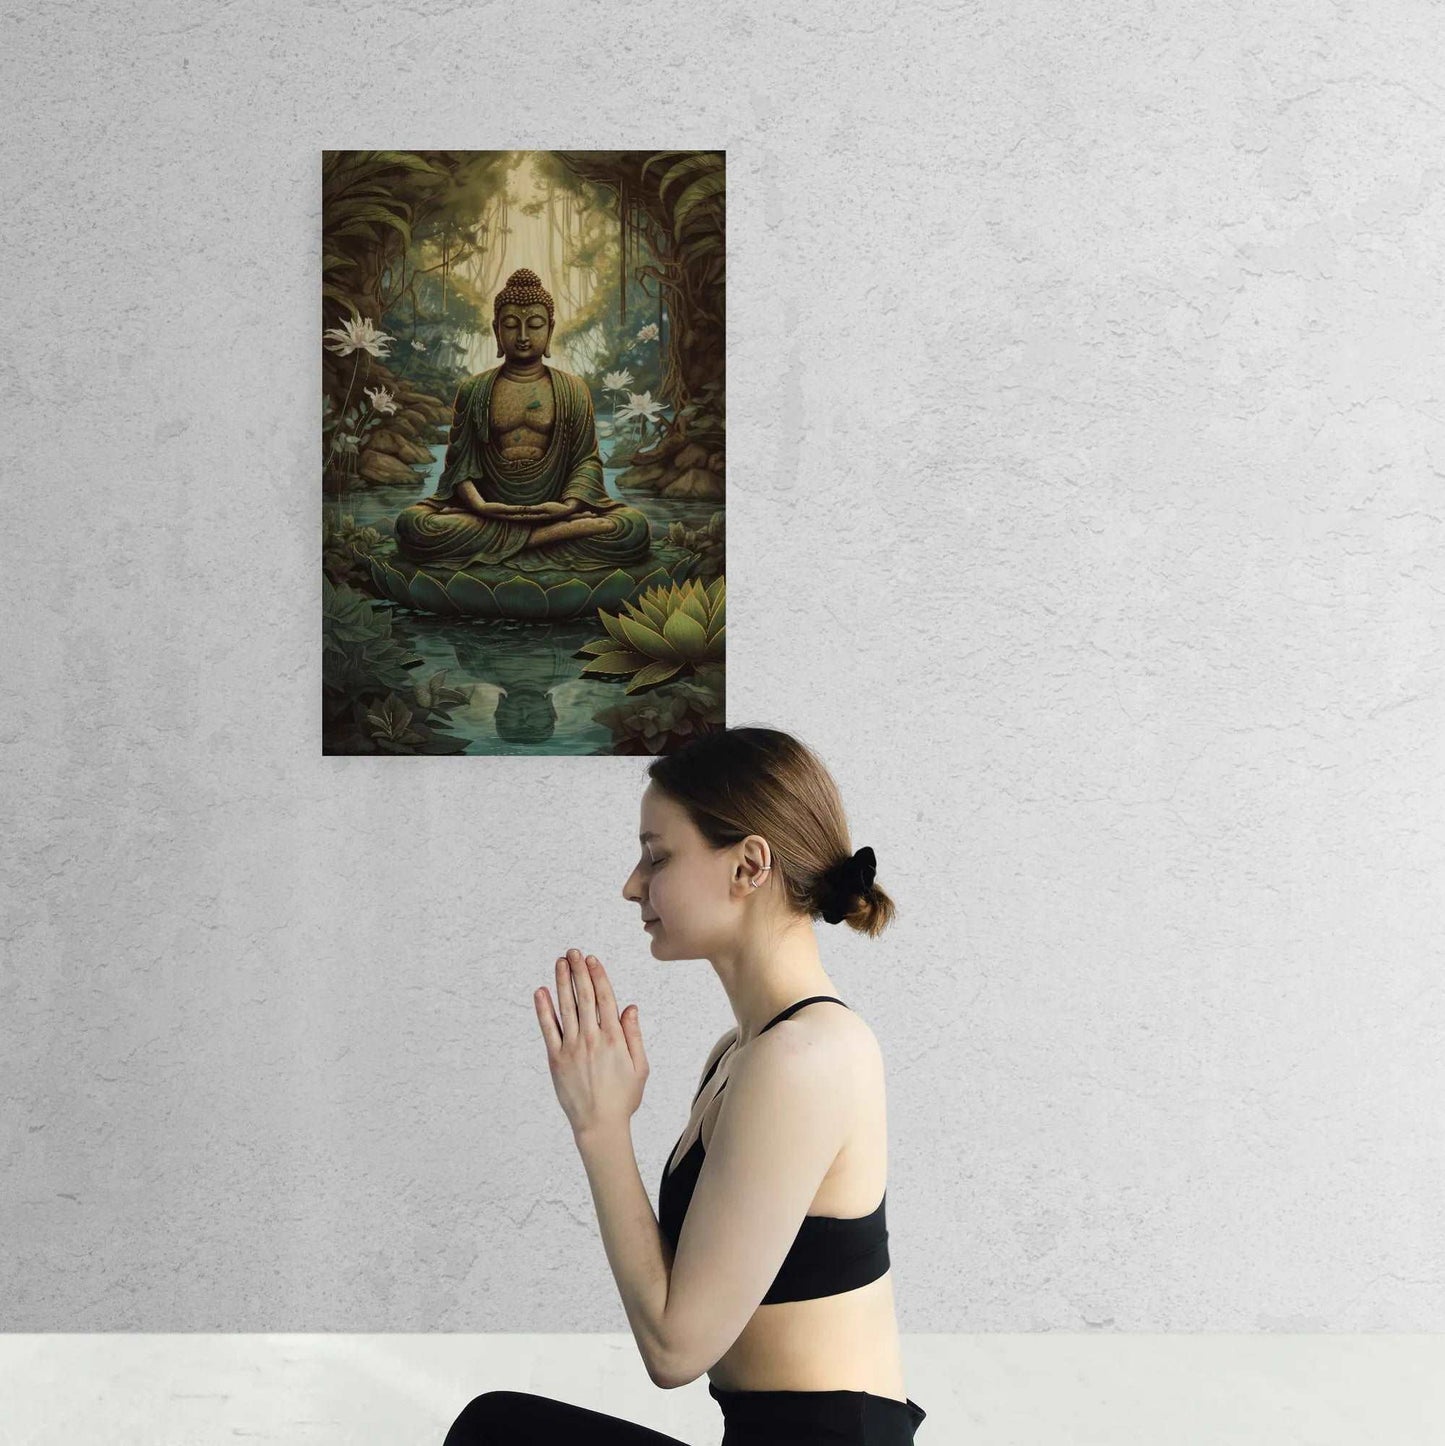 A woman in a contemplative yoga pose in front of a teal Buddha art print depicting a serene Buddha seated on a lotus in a mystical forest setting.